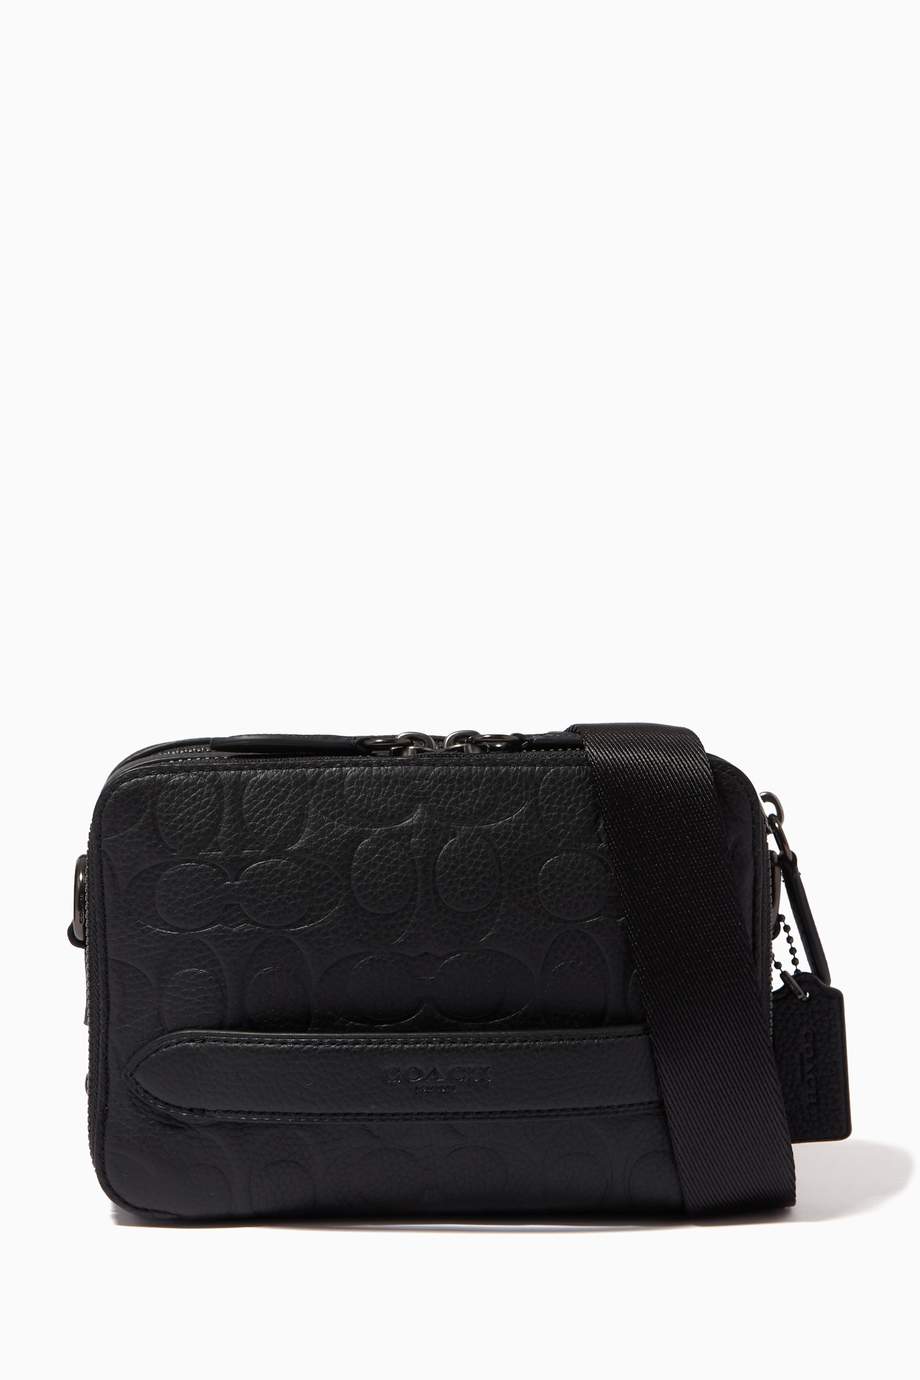 Shop Coach Black Charter Crossbody Bag in Signature Leather for Men ...